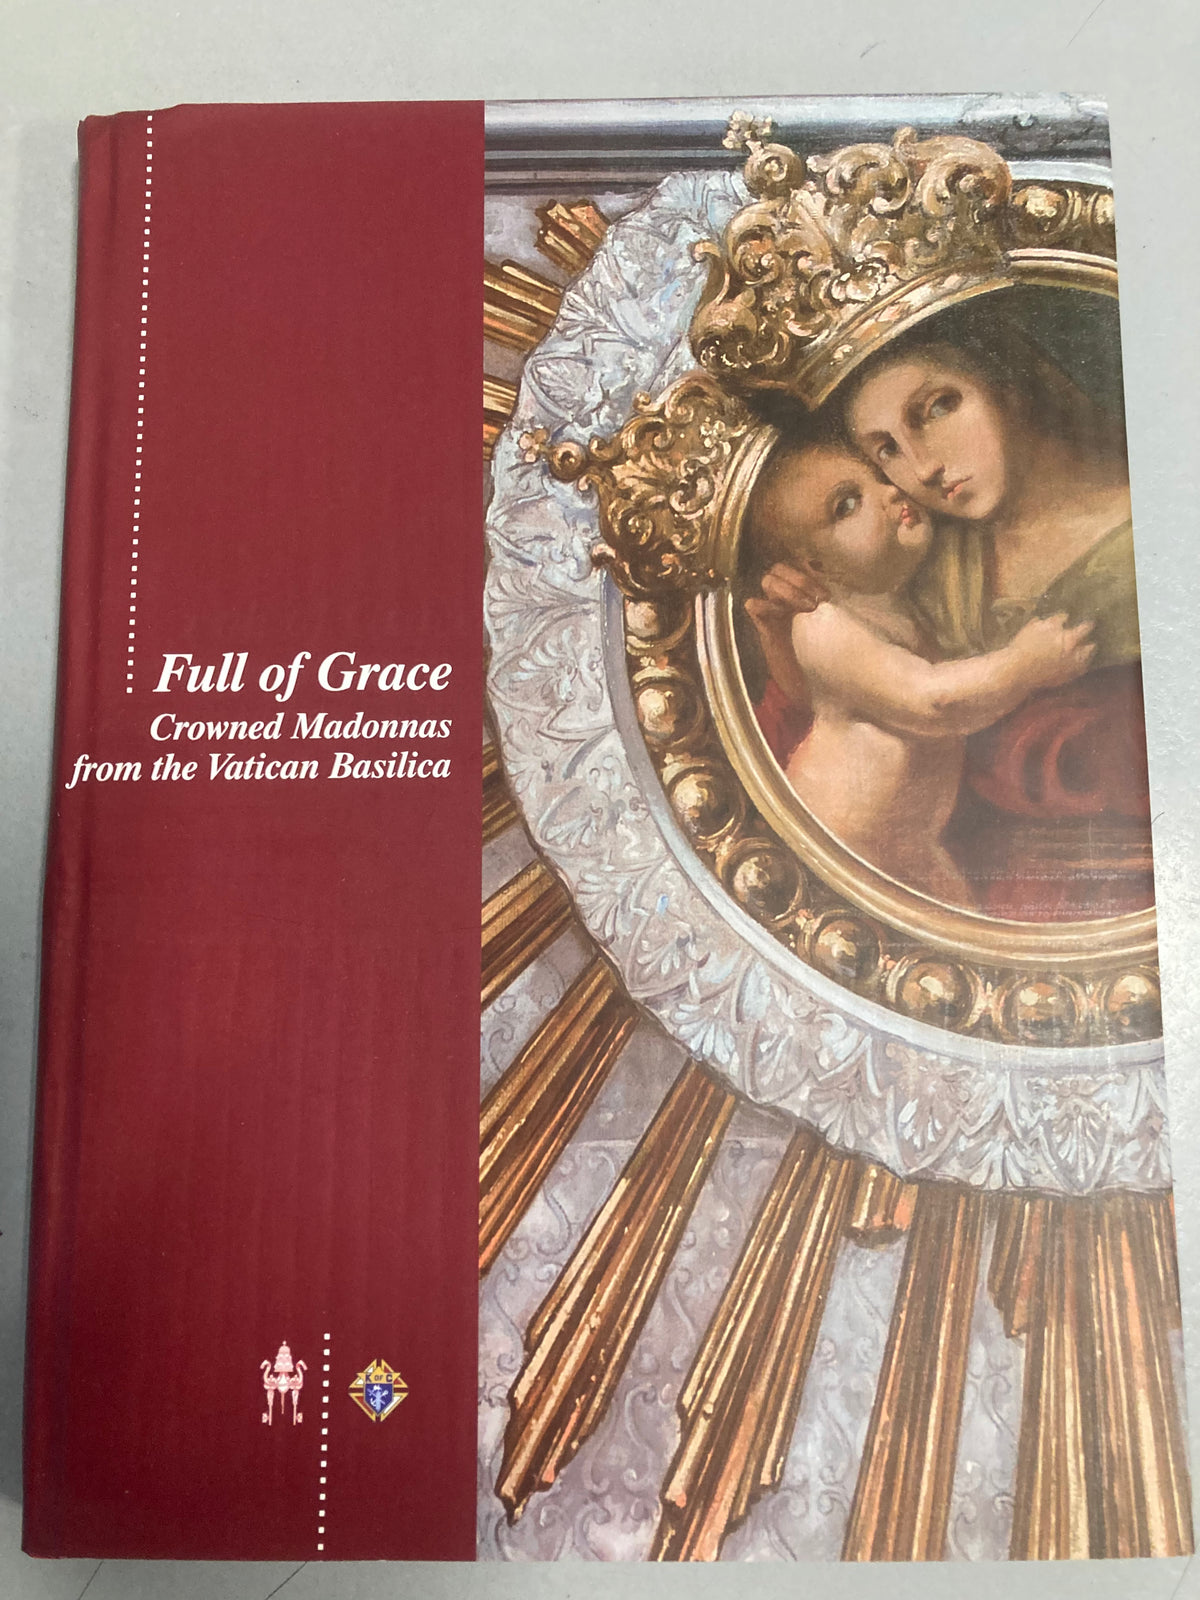 Full of Grace - Crowned Madonnas from the Vatican Basilica